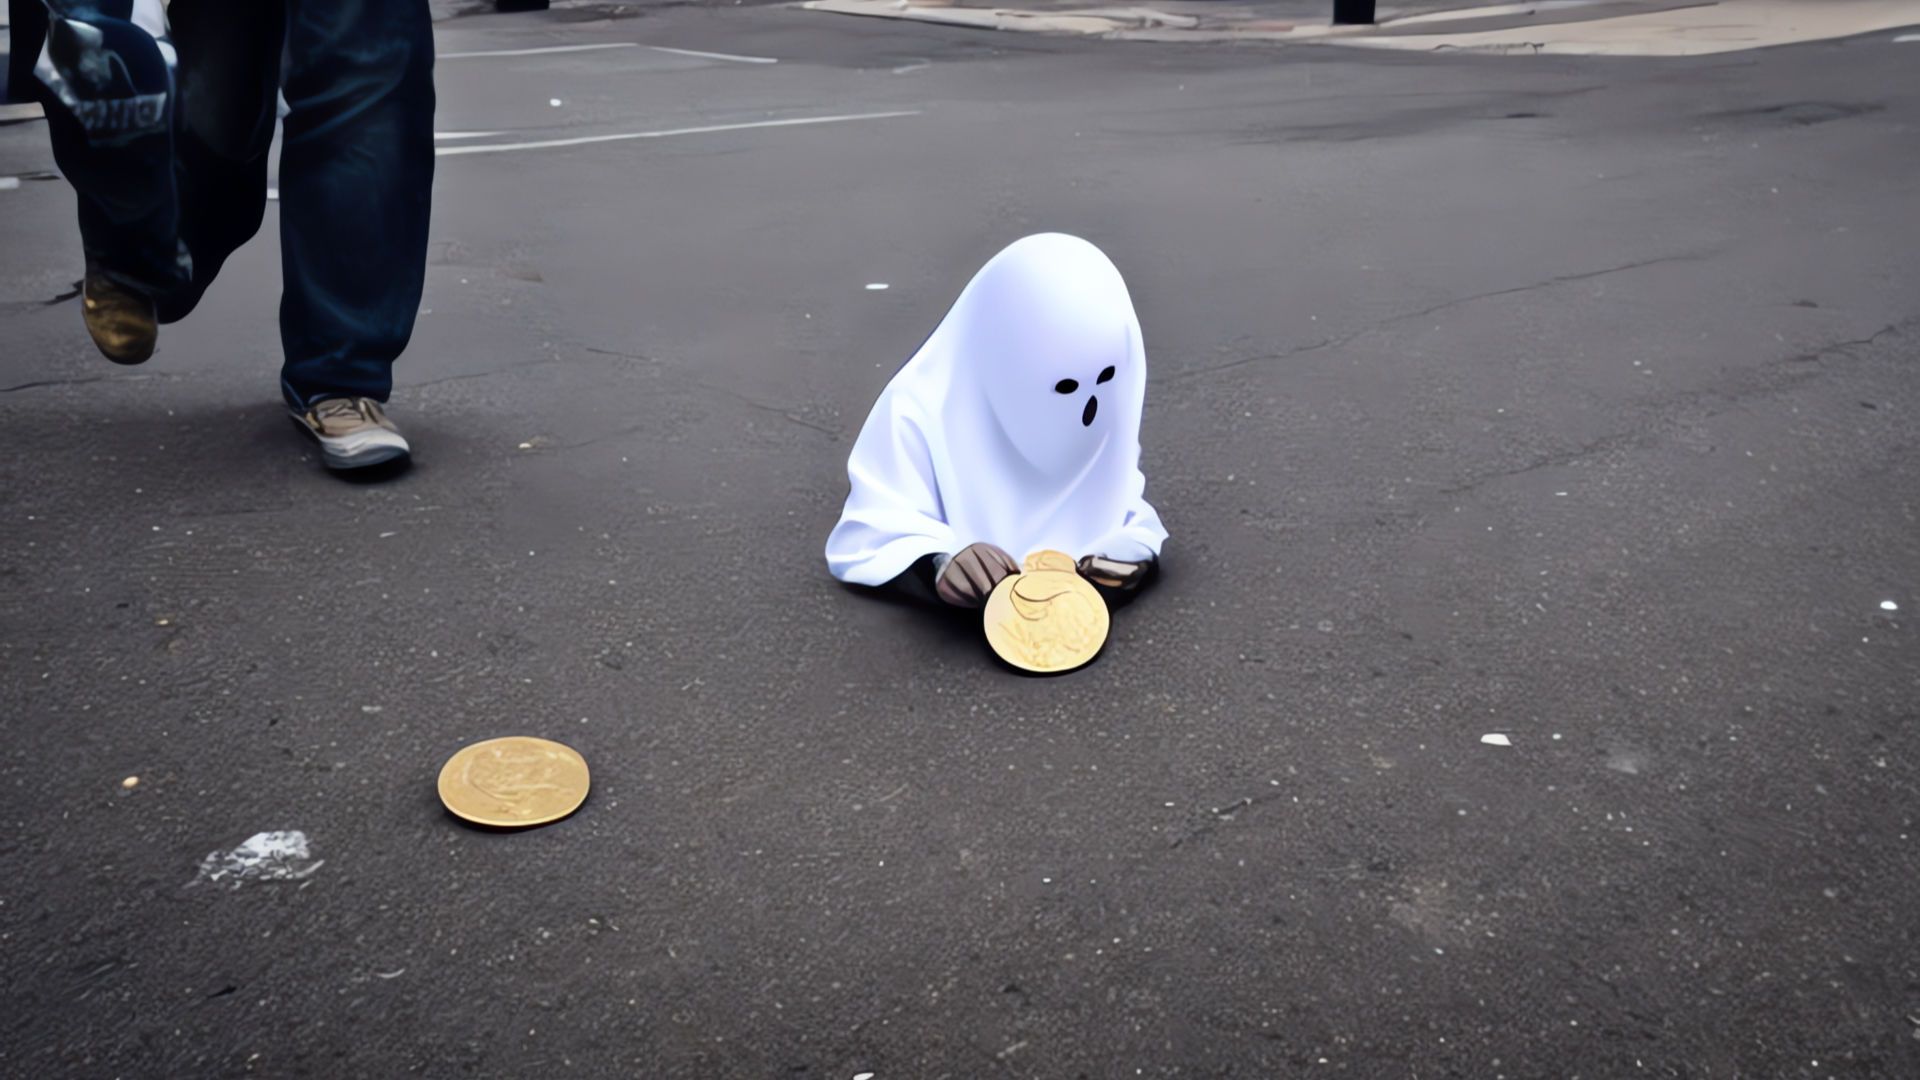 Artificial intelligence-generated image of a ghost touching some oversized coins on the road, as a person walks past in the background.